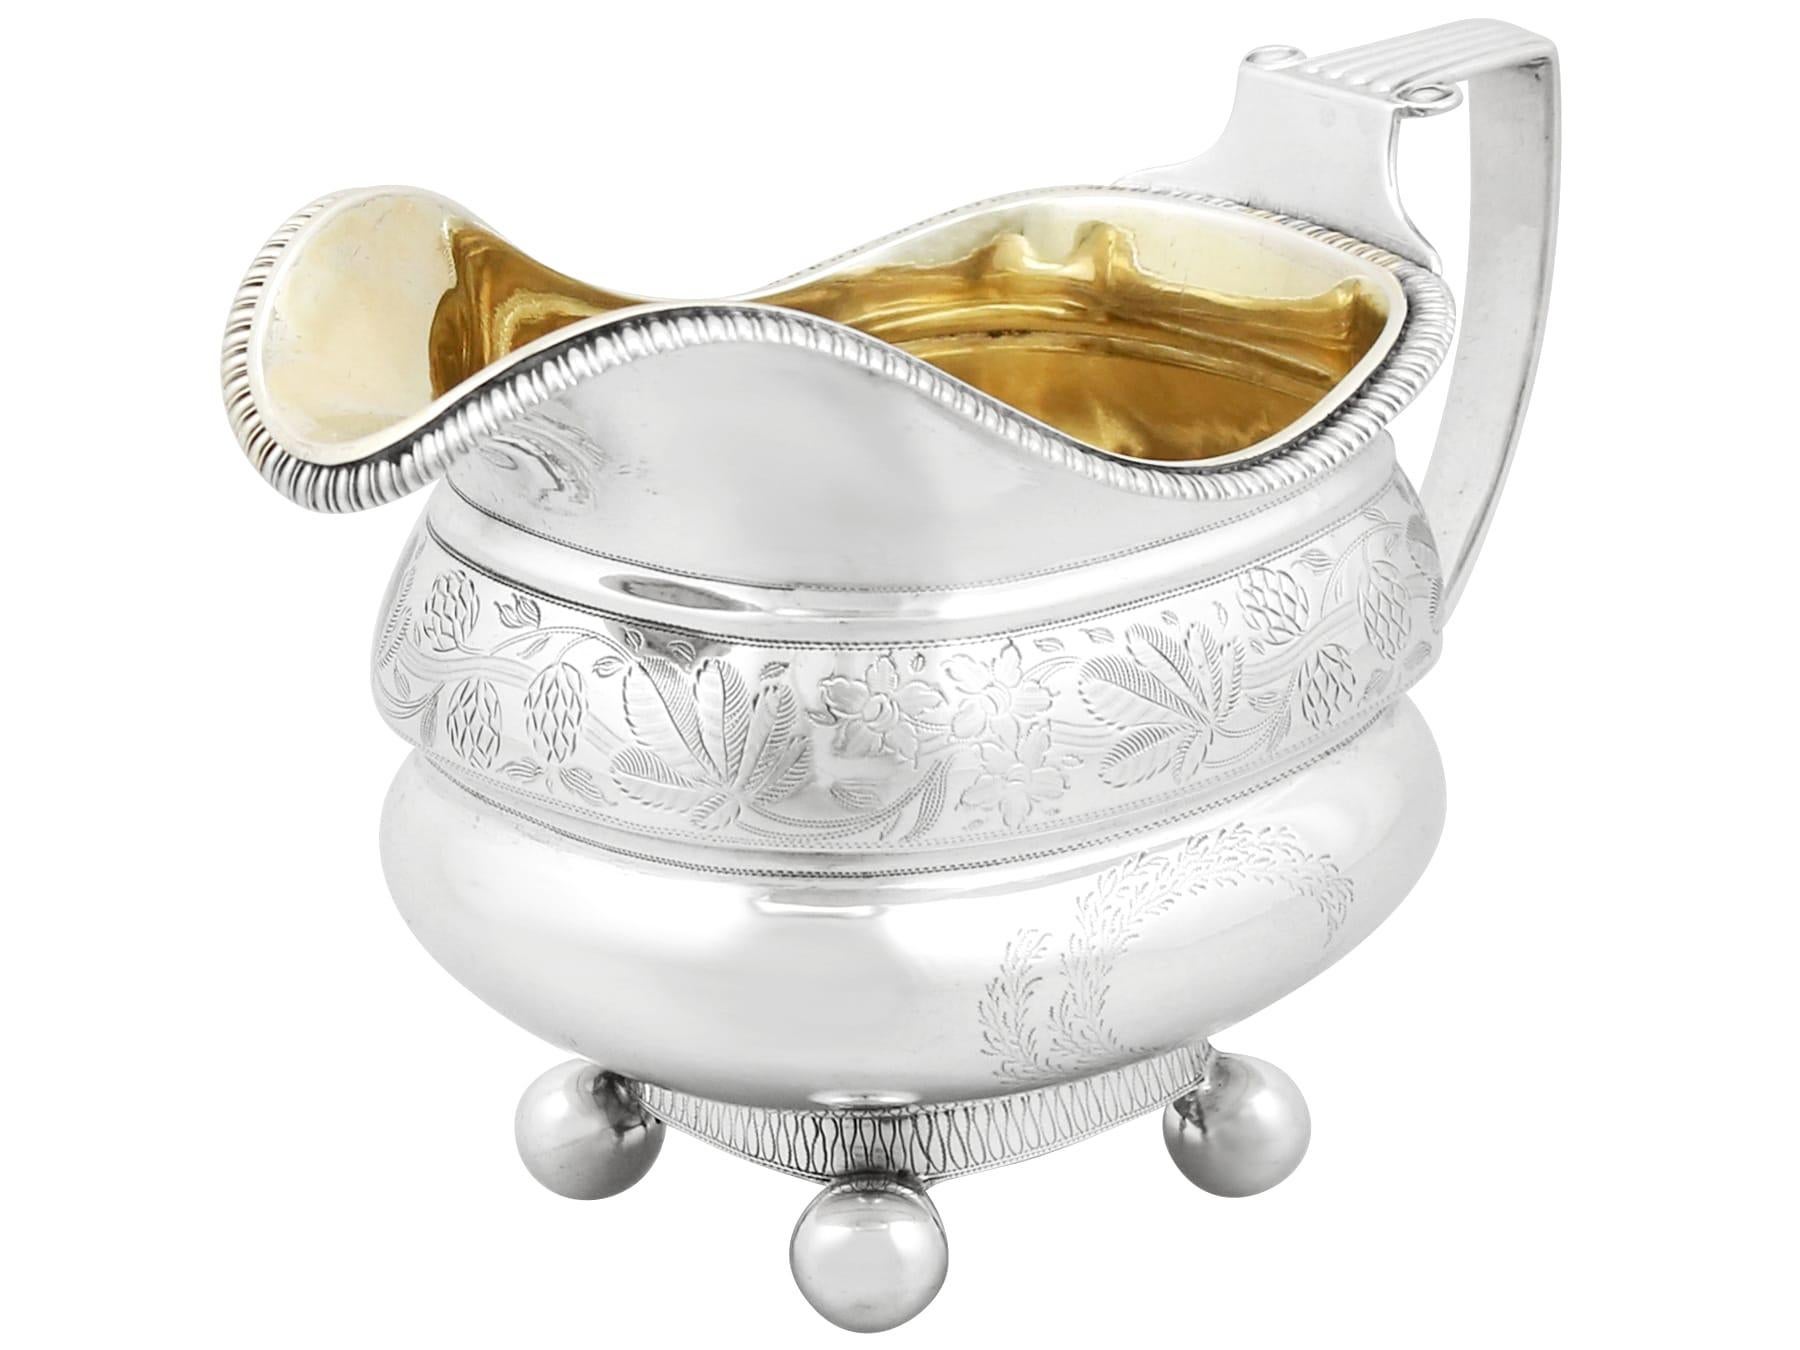 An exceptional, fine and impressive antique English sterling silver cream jug; an addition to our silver tea ware collection.

This exceptional antique silver cream jug has a rounded helmet shaped form.

The lower portion of the body is